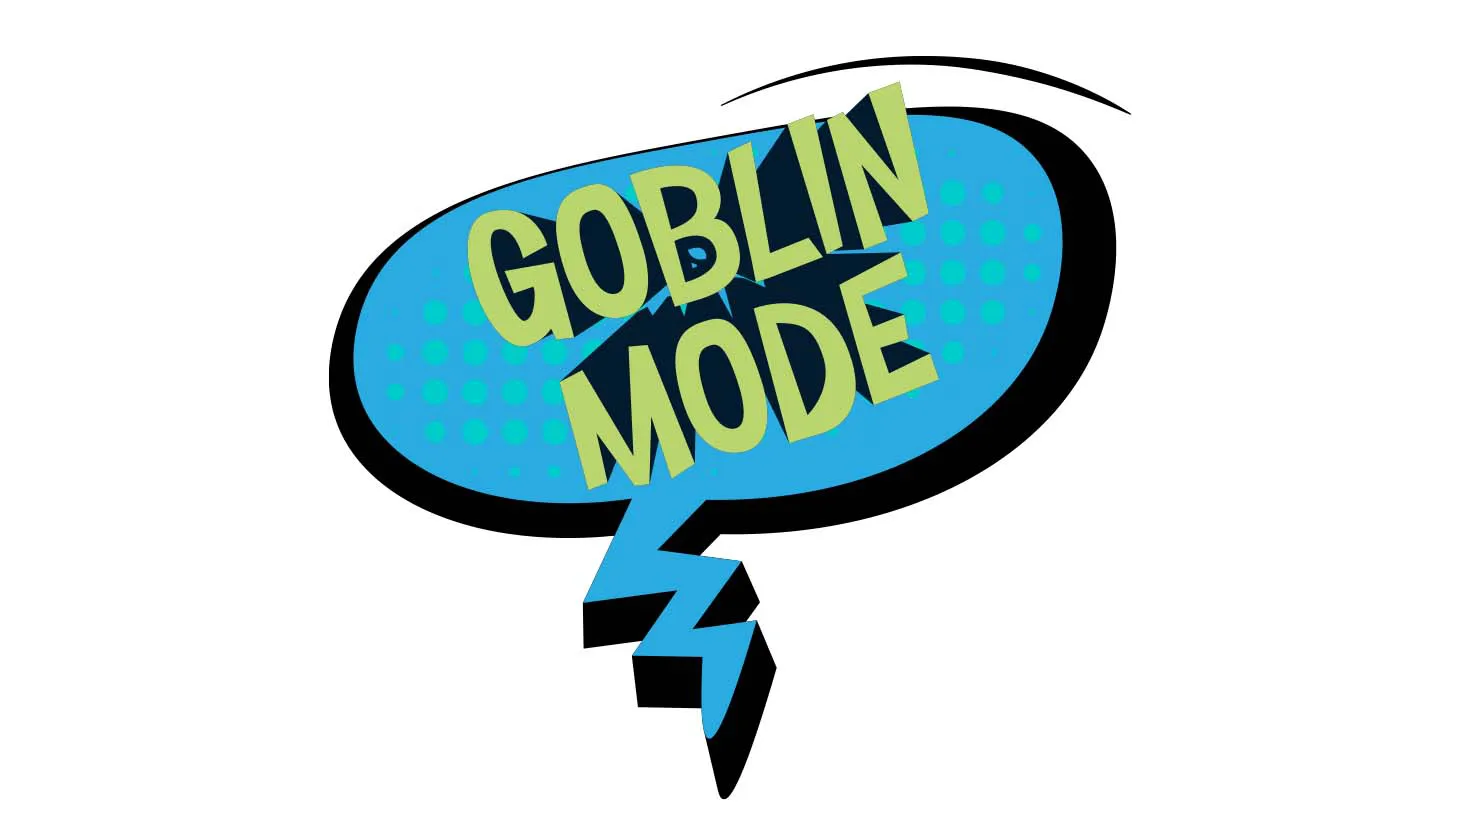 The Oxford English Dictionary defines “goblin mode” as “a type of behavior which is unapologetically self-indulgent, lazy, slovenly, or greedy – typically in a way that rejects social norms or expectations.”